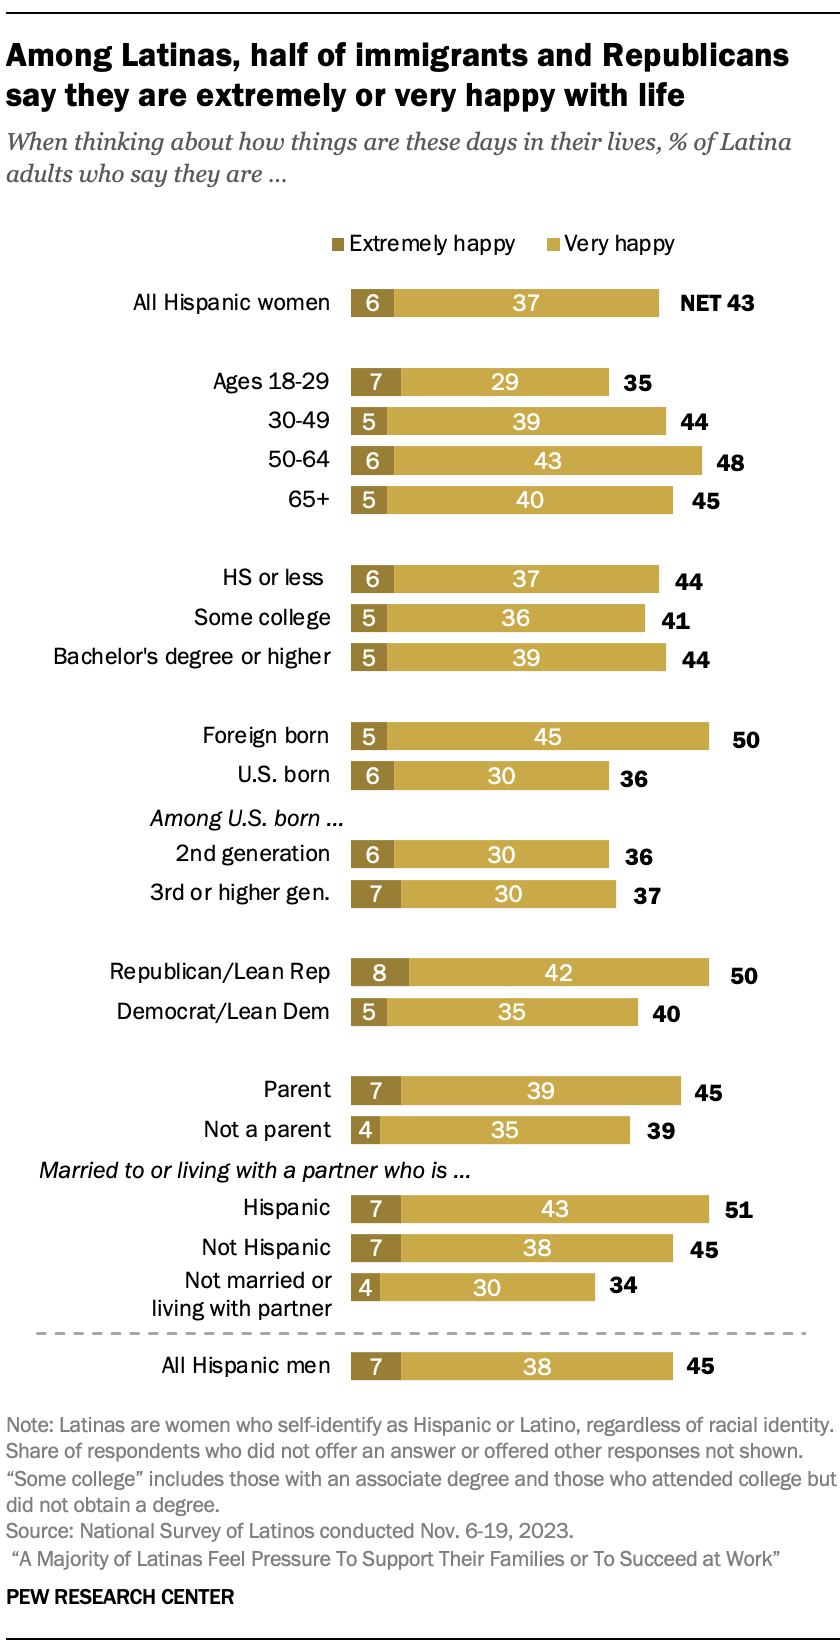 Bar chart comparing U.S. Latinas’ views of happiness in life across demographic groups. Among Latinas, half of immigrants and Republicans or Republican leaners say they are extremely or very happy with how things are in their lives these days